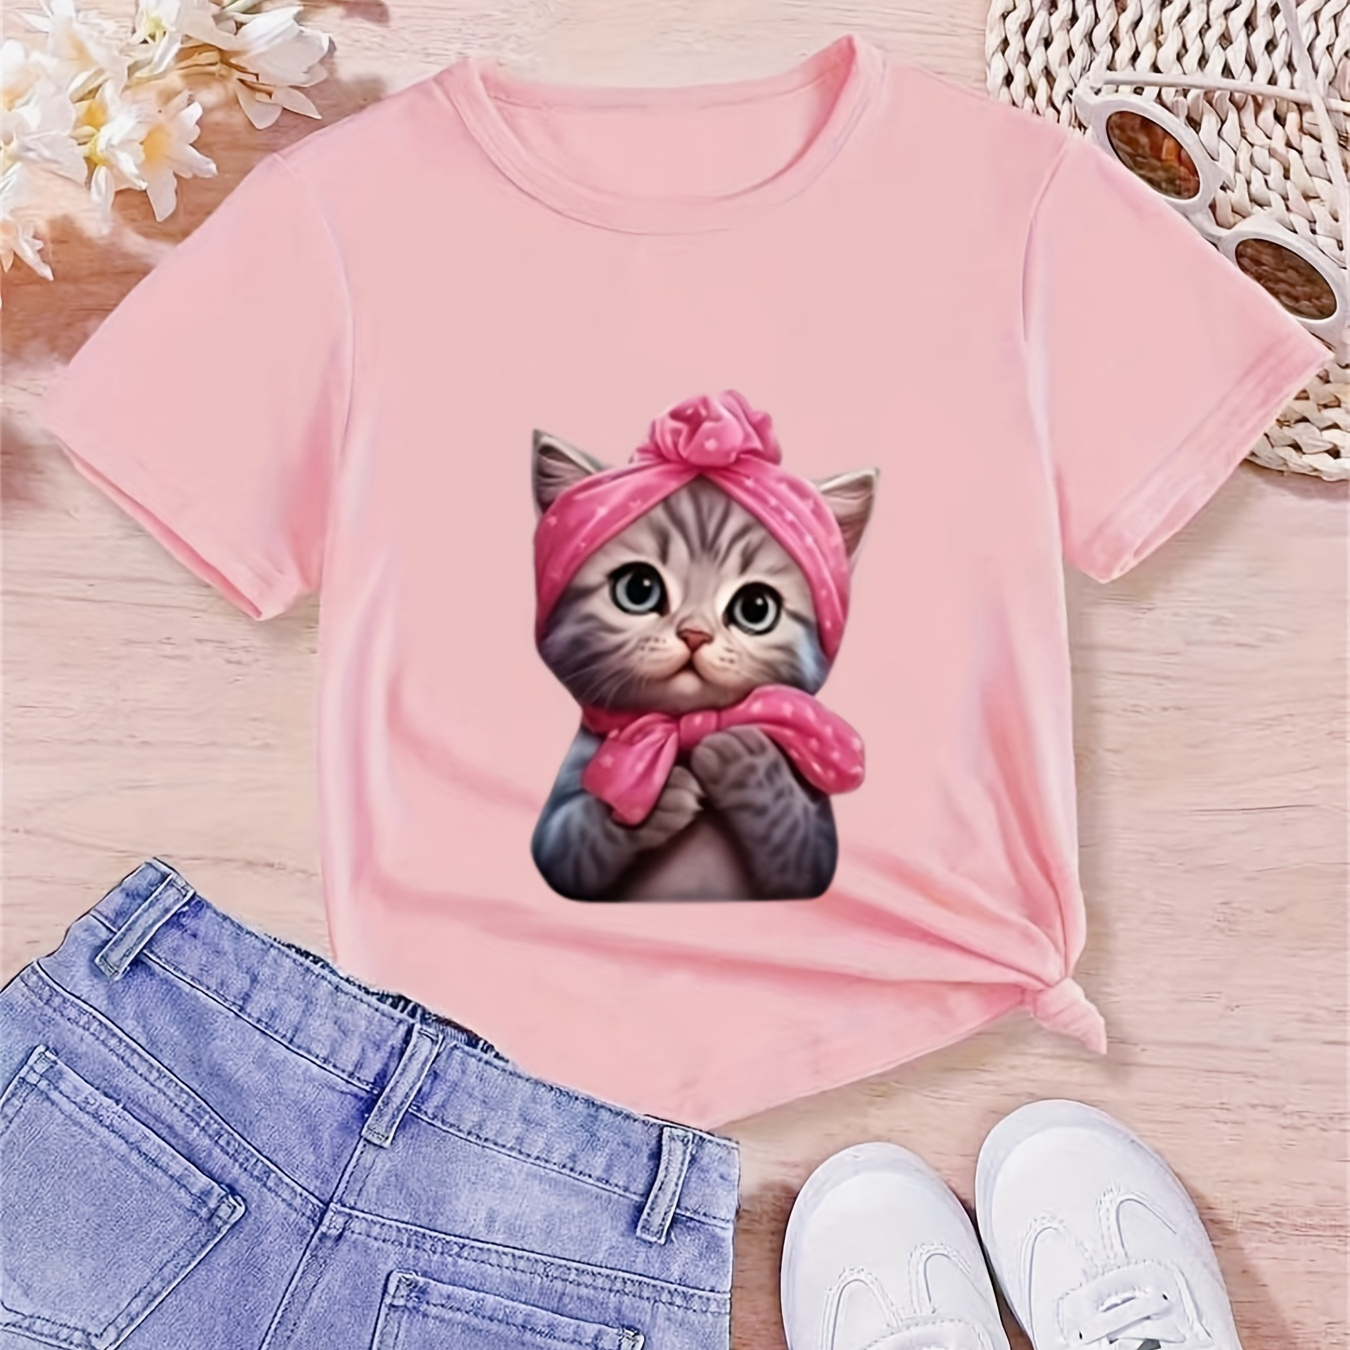 

Adorable Cat With Headscarf Graphic Print Creative T-shirts, Soft & Elastic Comfy Crew Neck Short Sleeve Tee, Girls' Summer Tops